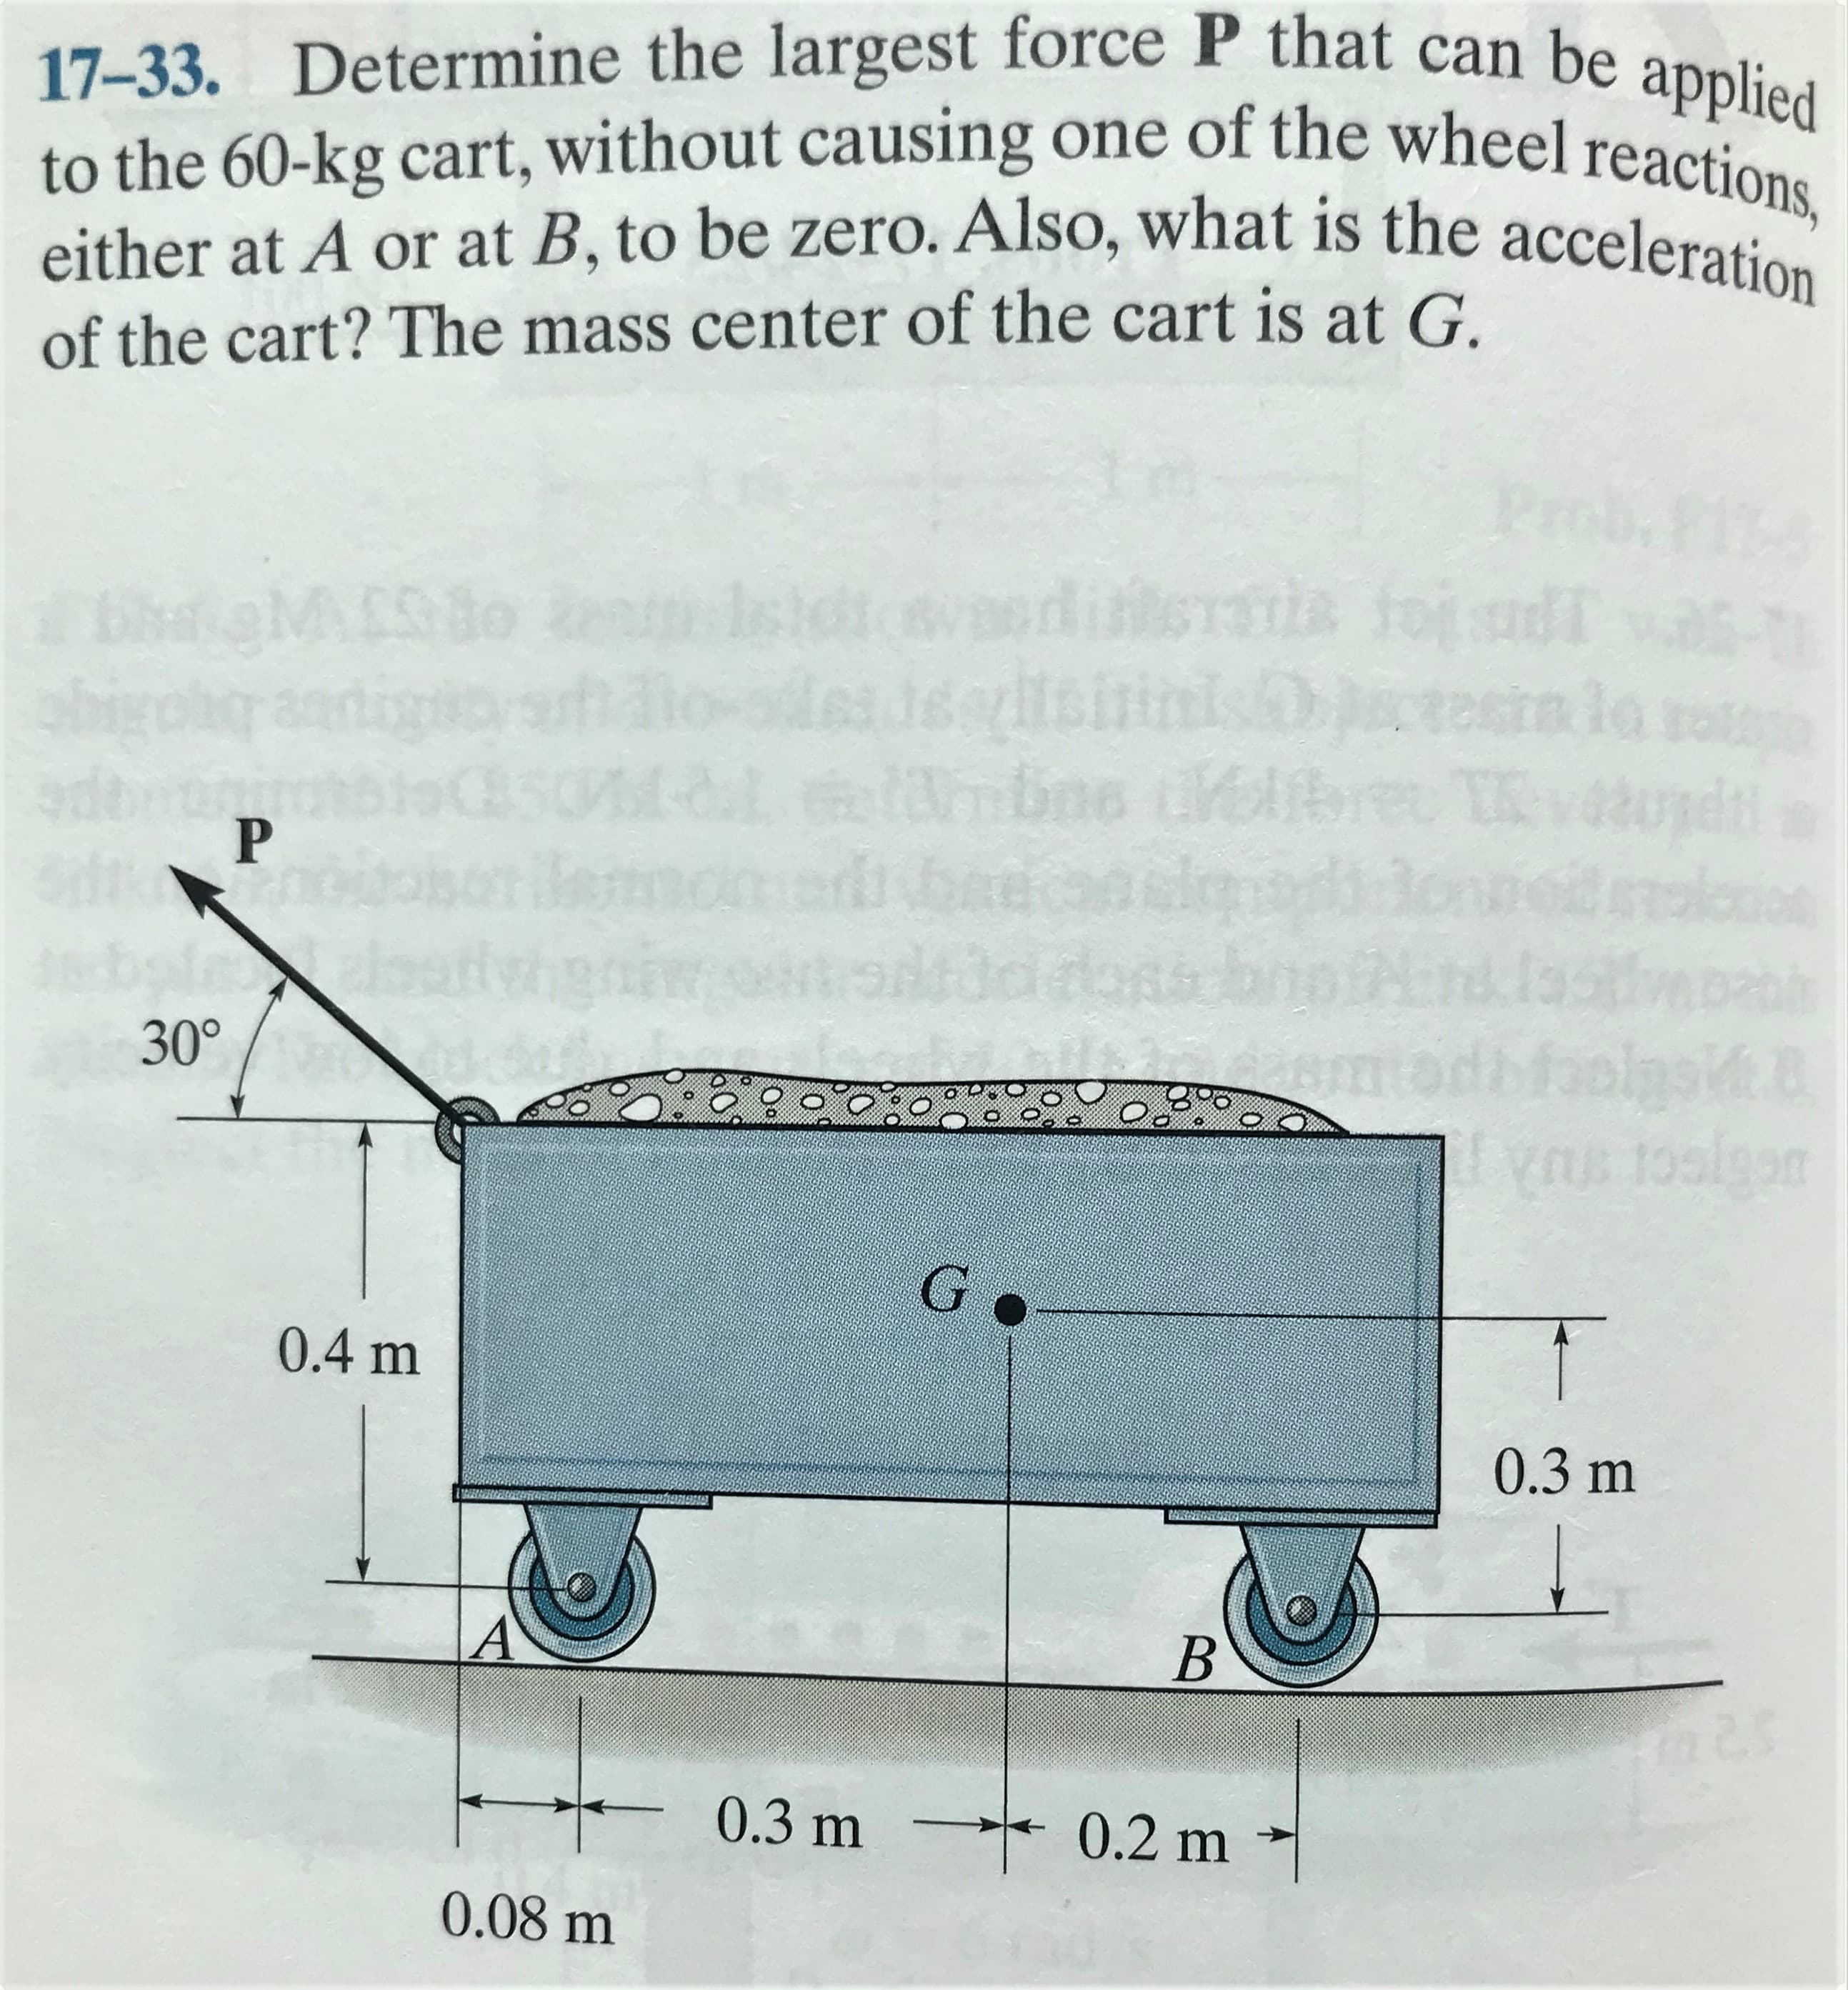 17-33. Determine the largest force P that can be applied
to the 60-kg cart, without causing one of the wheel reactiu
either at A or at B, to be zero. Also, what is the acceleration
of the cart? The mass center of the cart is at G.
Pr
to
werditsratia toj udT vas-
JeeltsininisDtosr
sinlo
ielibre TRvupd
bale
elsat
dag bnotHin.las
30°
200:0
1osigan
0.4 m
0.3 m
0.3 m
→* 0.2 m
0.08 m
